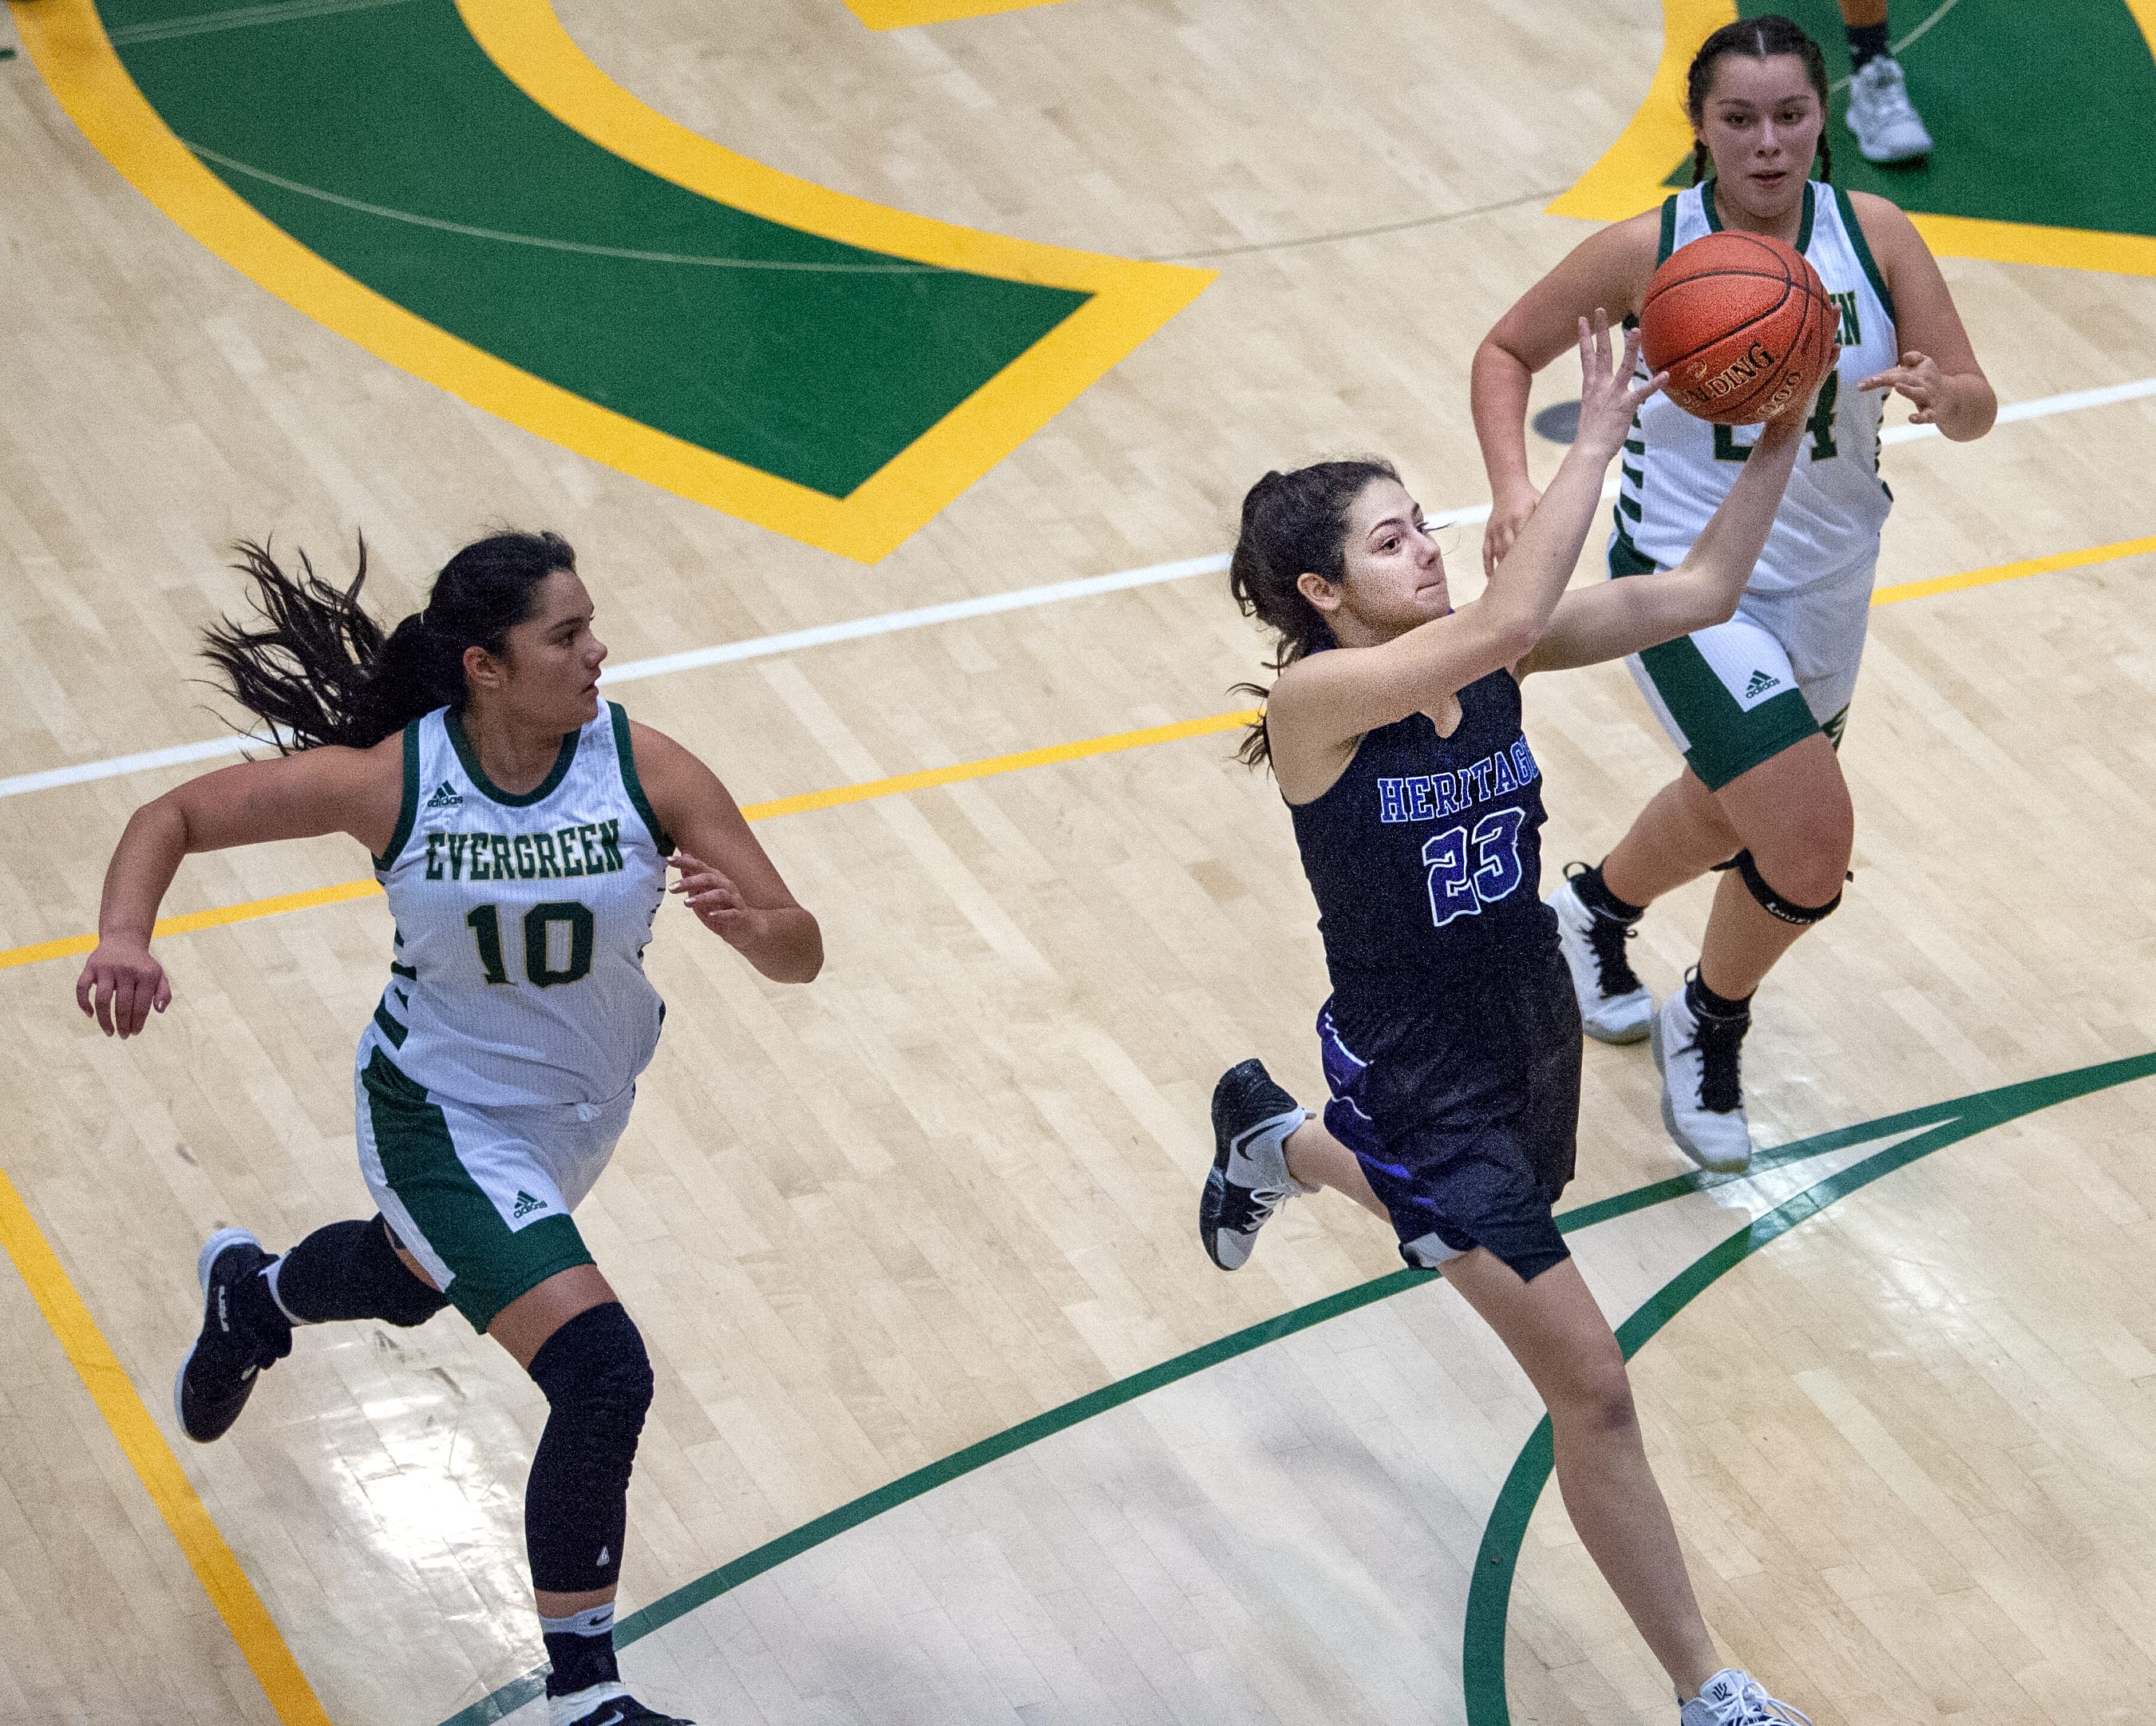 Images from Heritage’s 57-19 win over Evergreen in girls basketball nonleague play Tuesday at Evergreen High School.